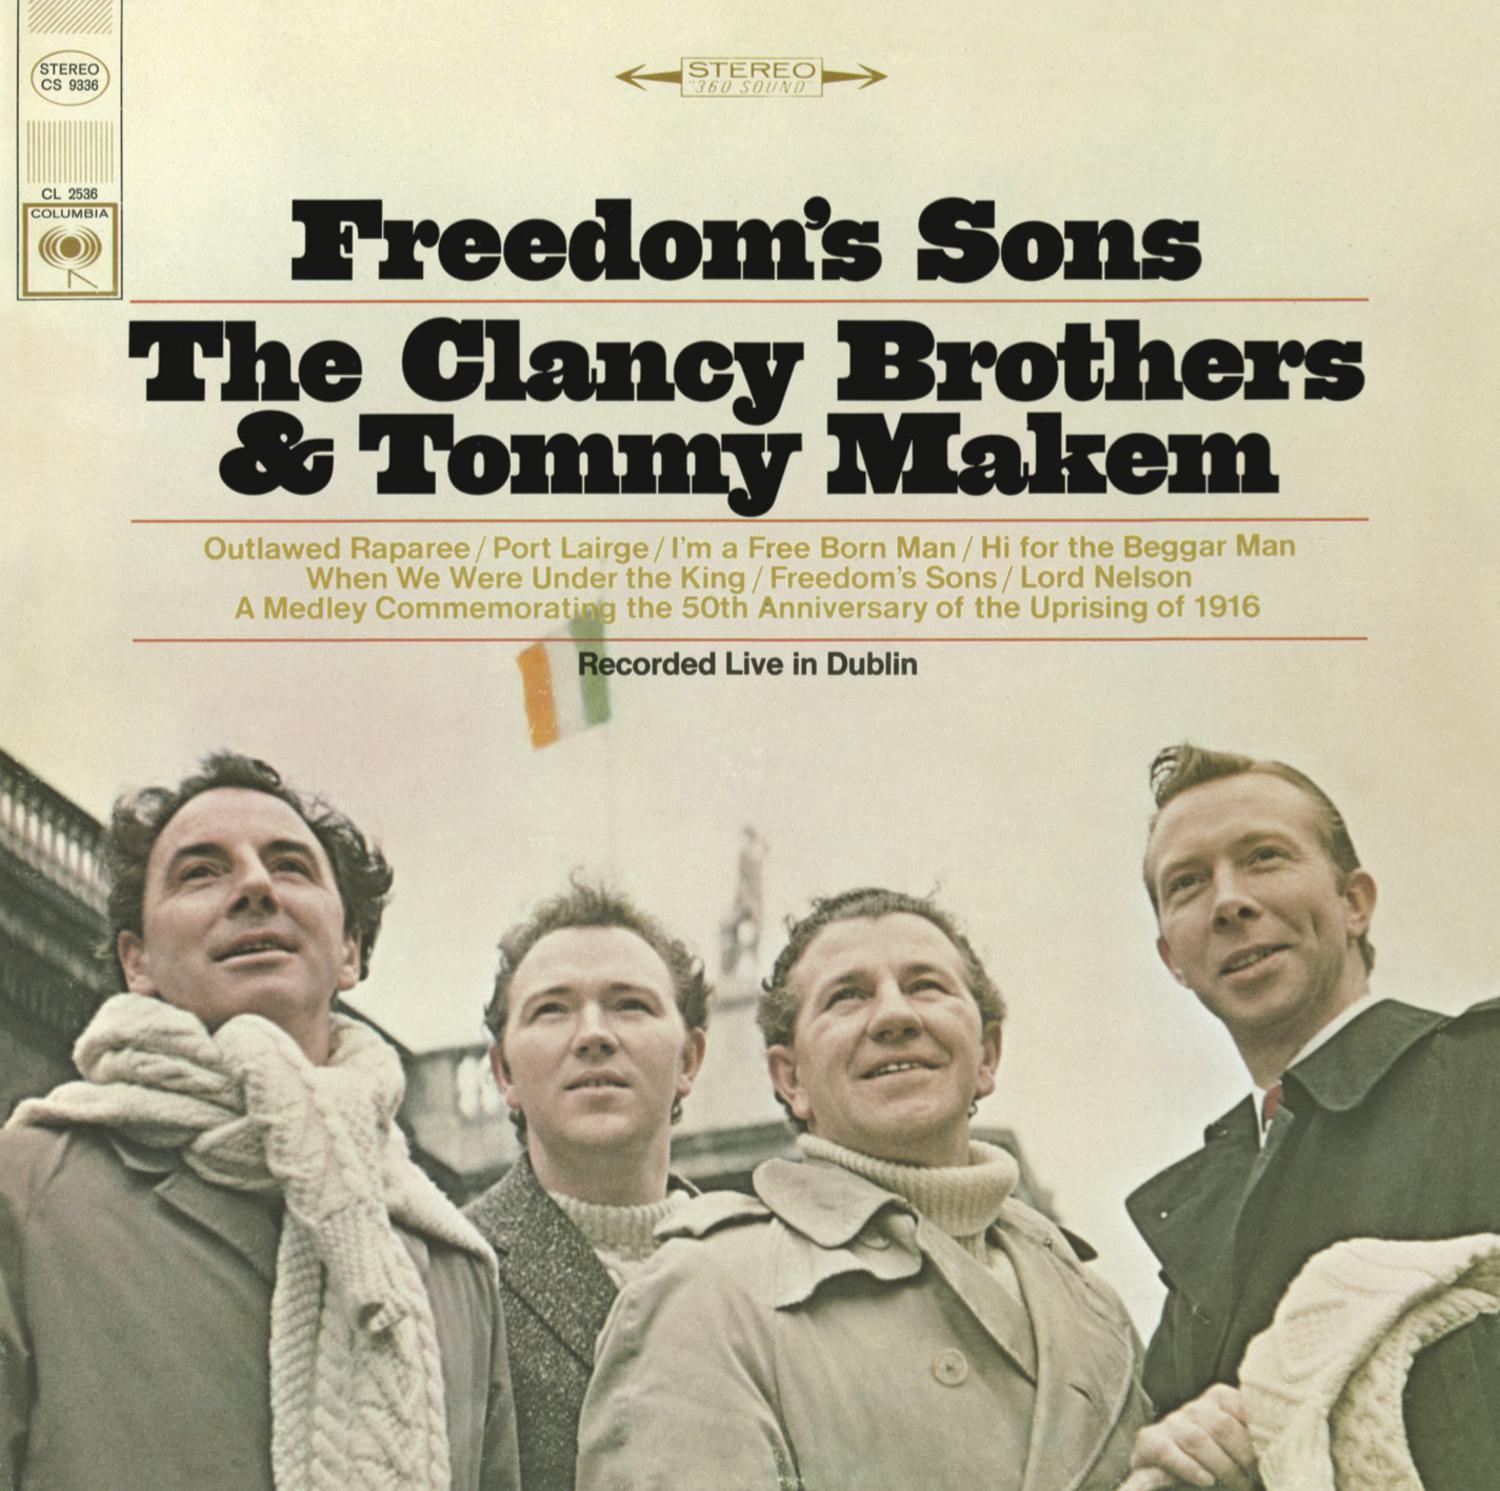 The Clancy Brothers & Tommy Makem - Freedom’s Sons (1966/2015) [AcousticSounds FLAC 24bit/96kHz]